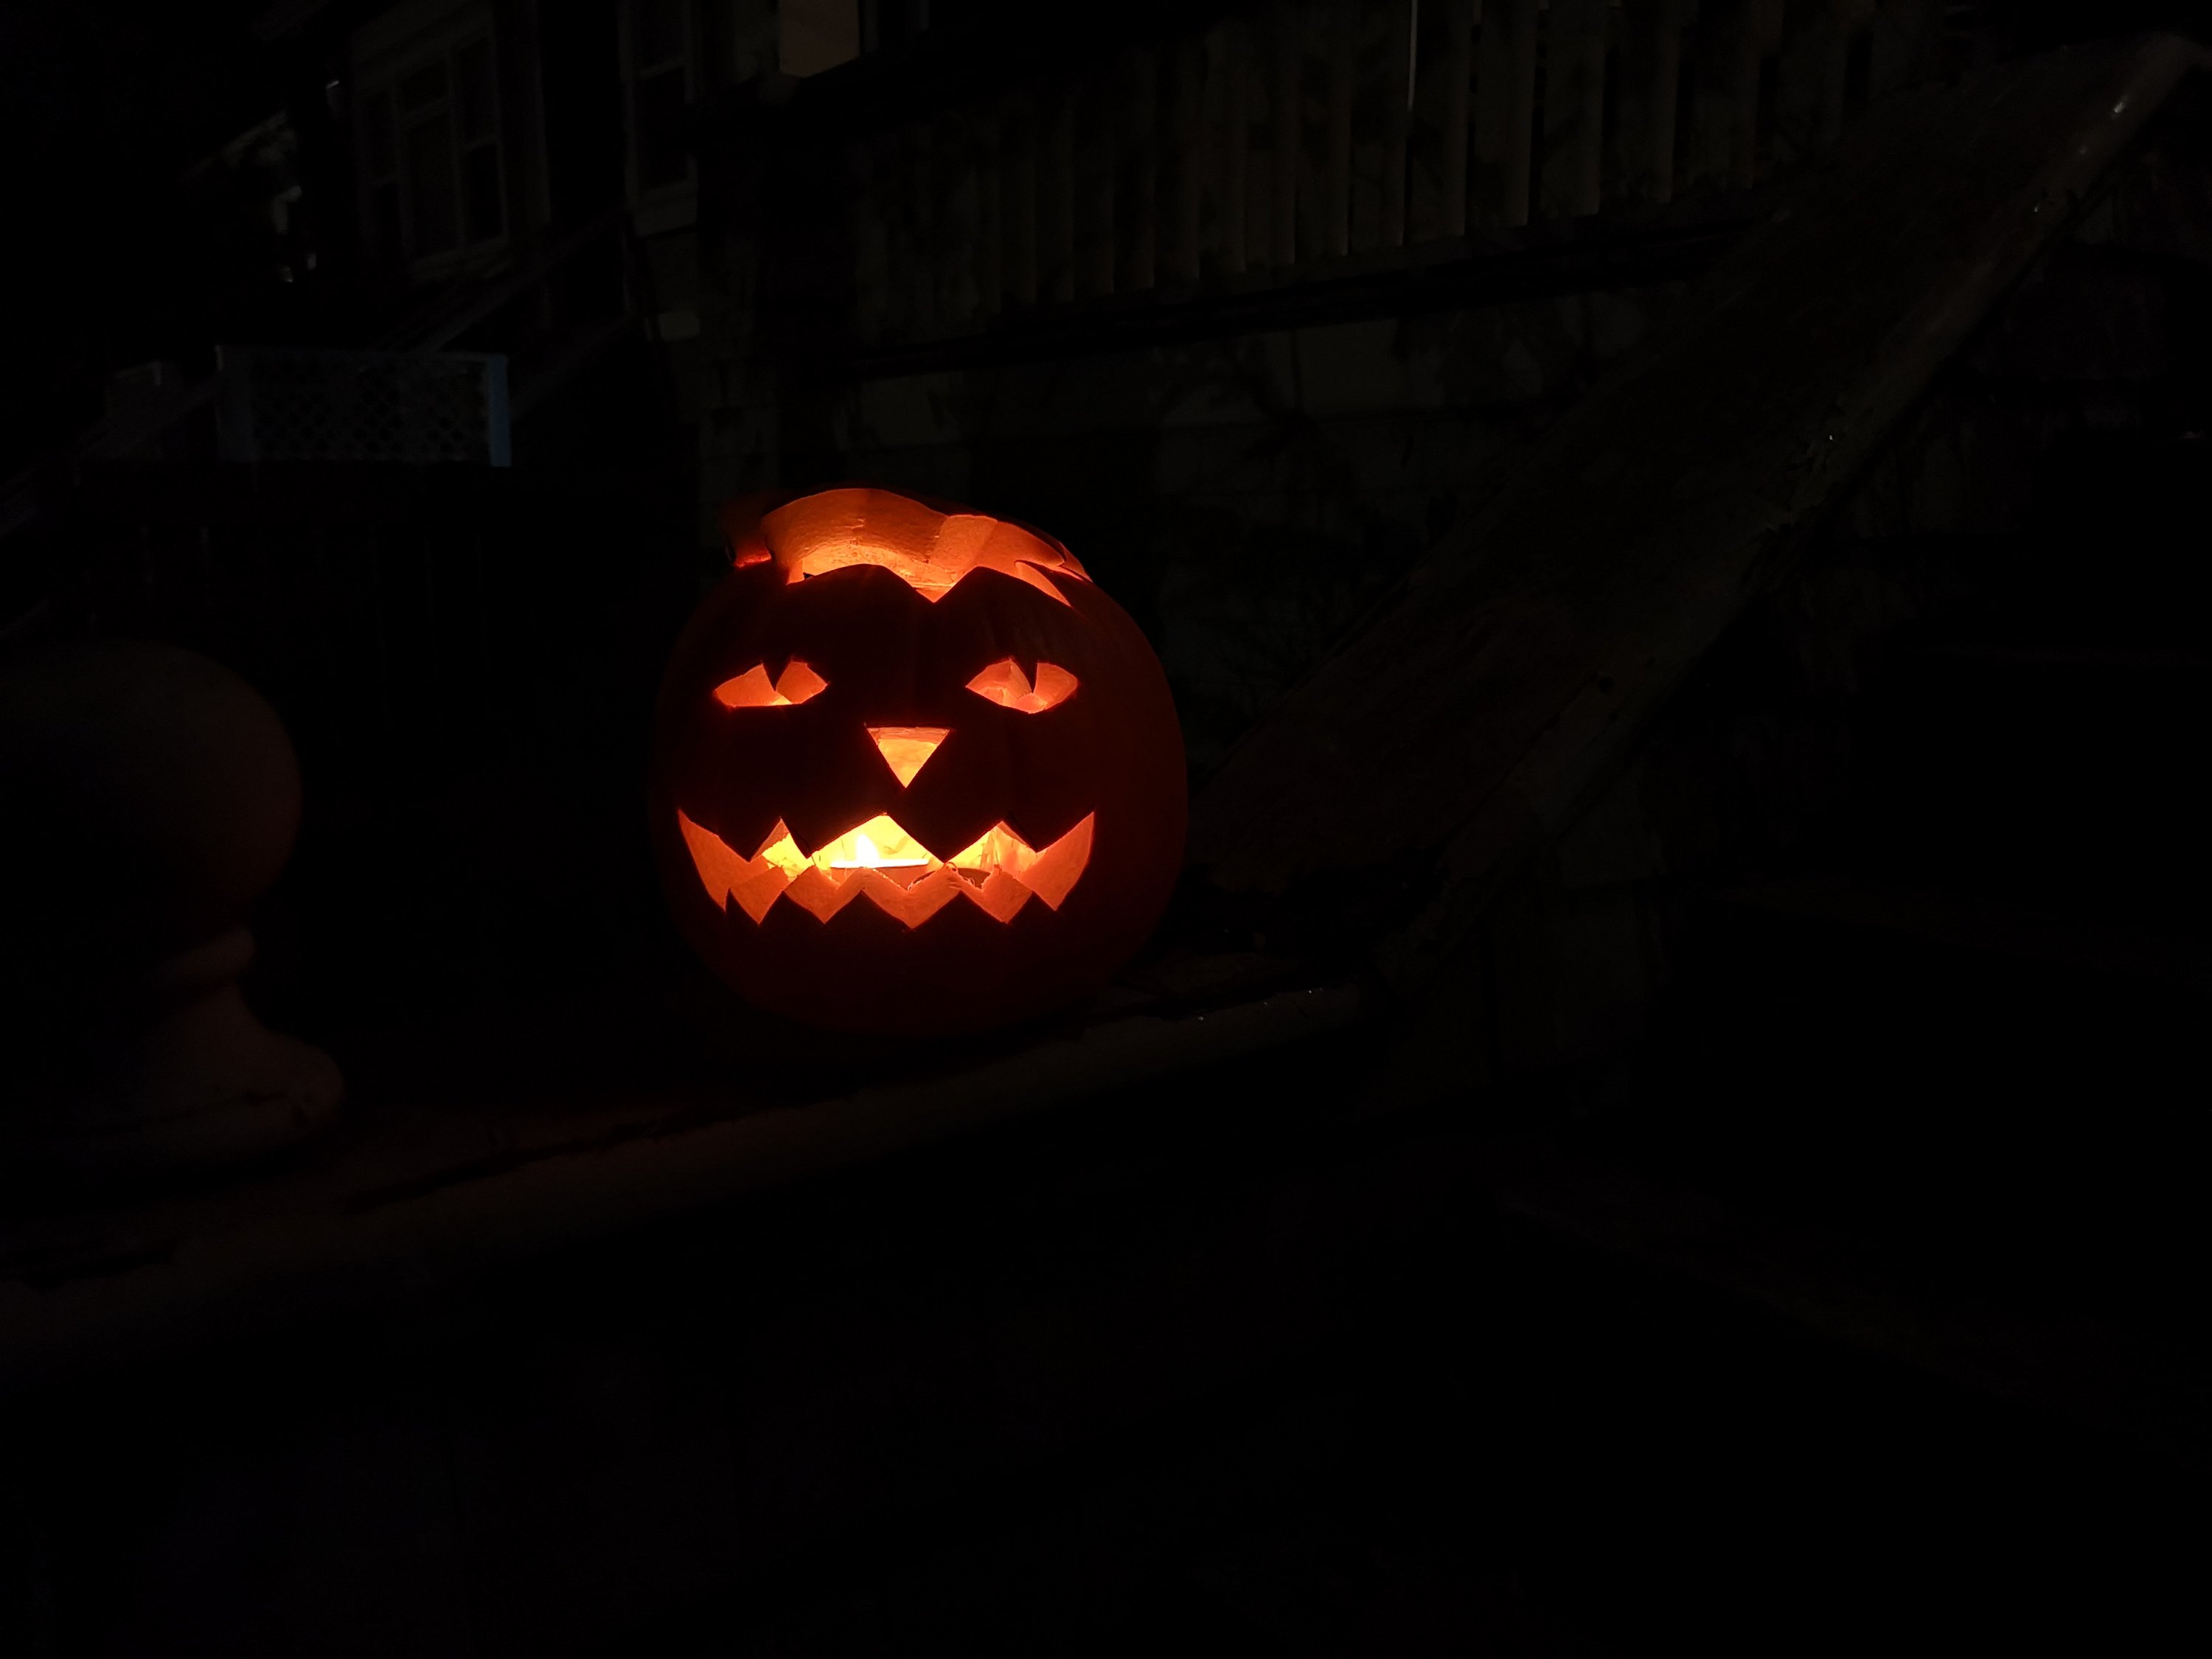 A glowing pumpkin on the banner of our front step, in VicWest.